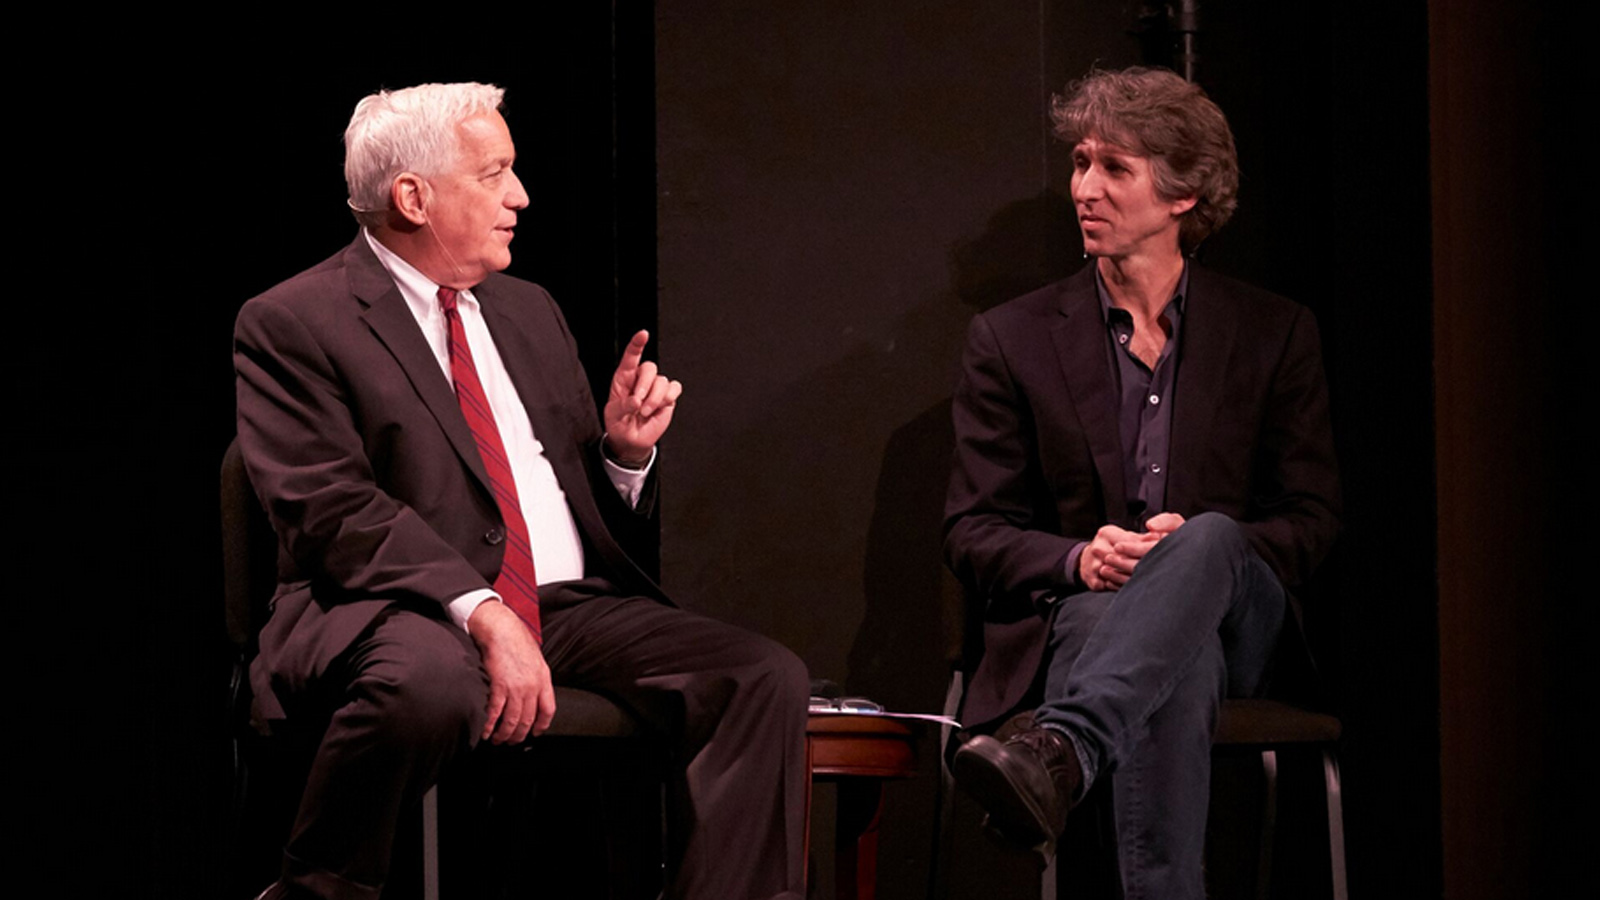 Walter Isaacson in conversation with Damian Woetzel